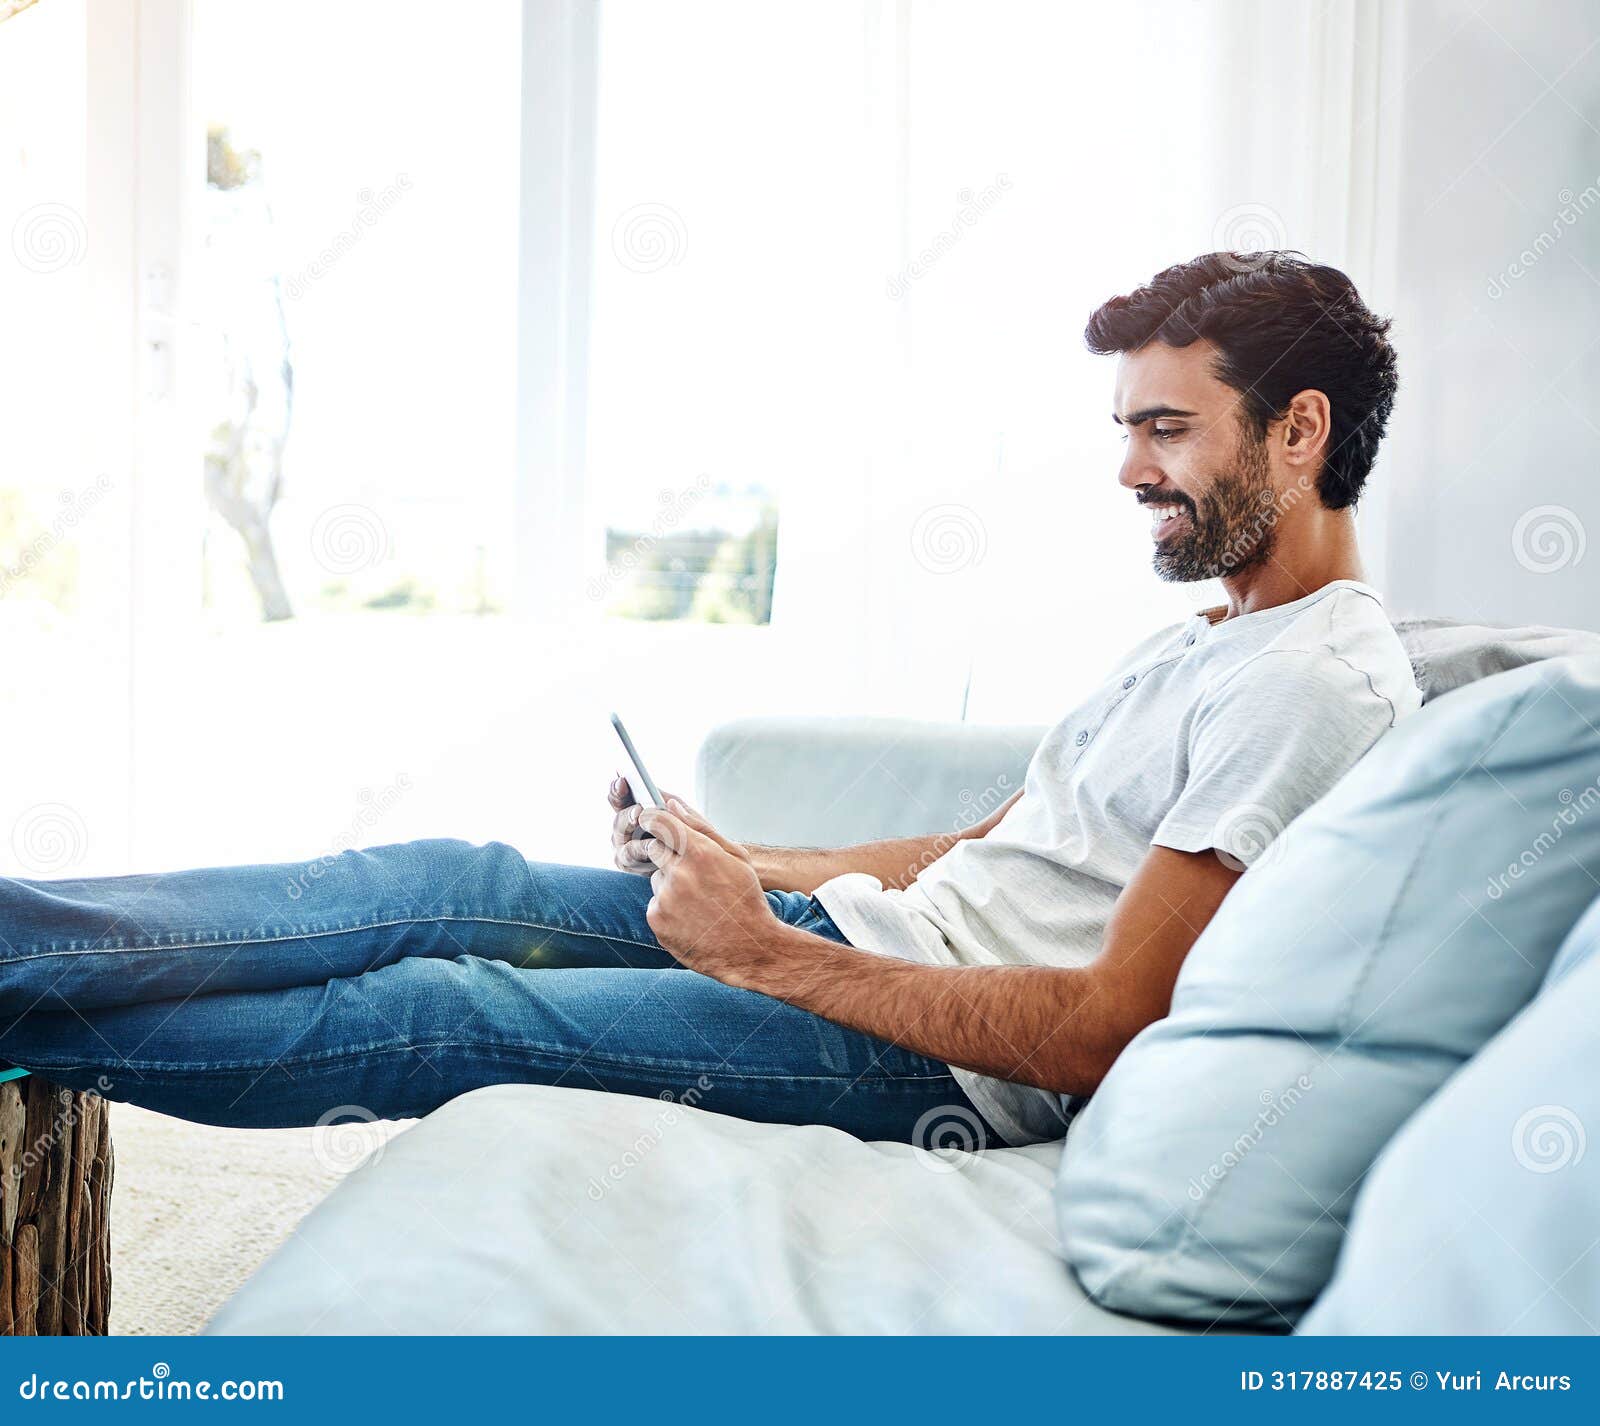 home, man and tablet on sofa for networking, chat and online conversation with contact. living room, male chatter and